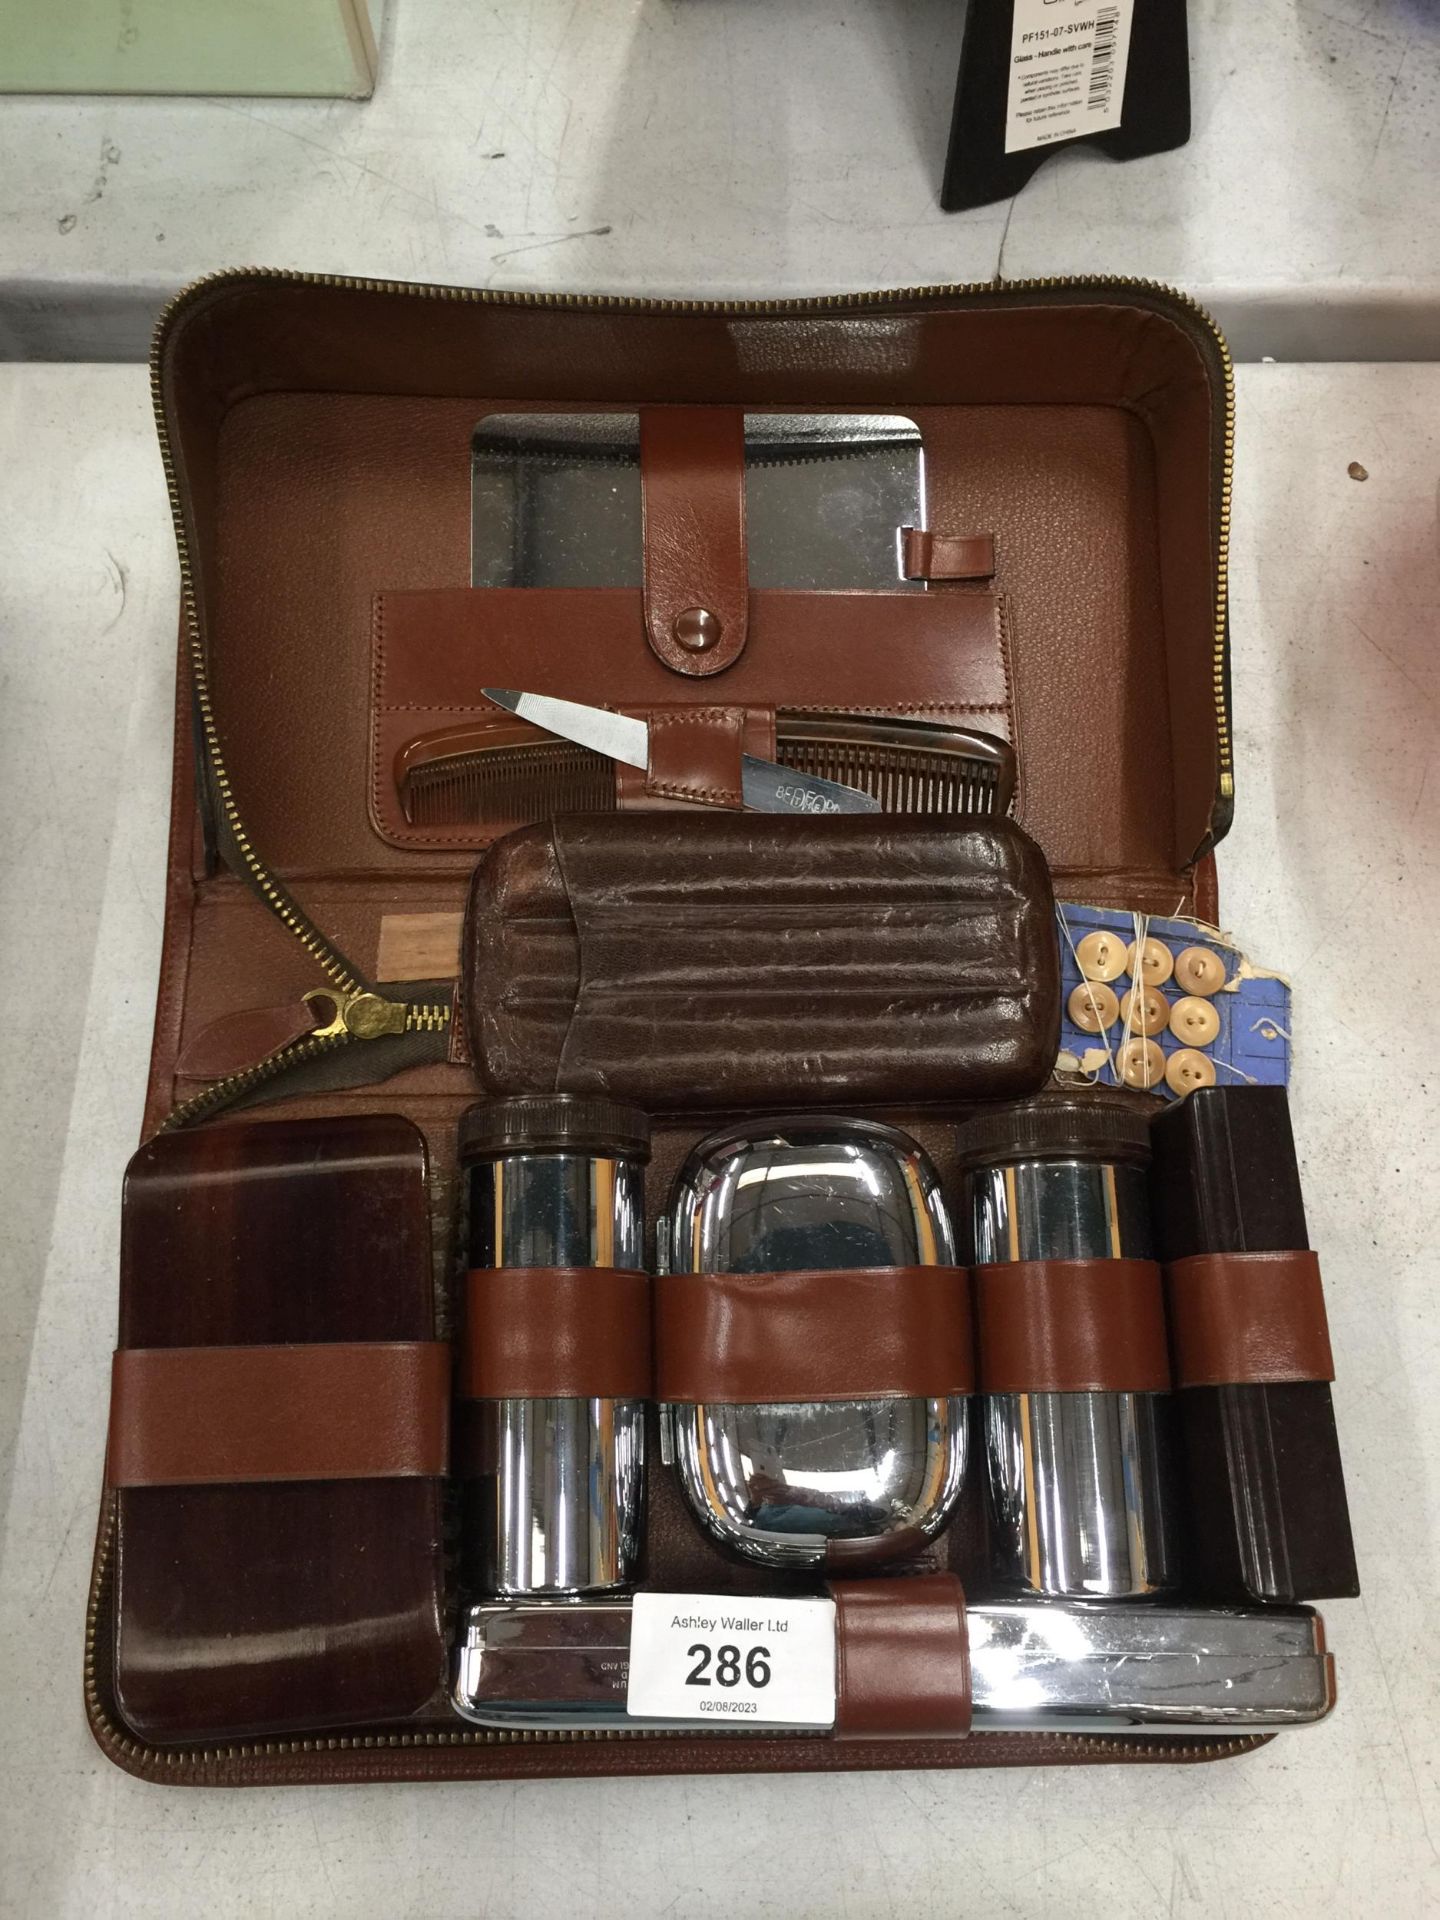 A GENTLEMEN'S GROOMING KIT IN A LEATHER CASE